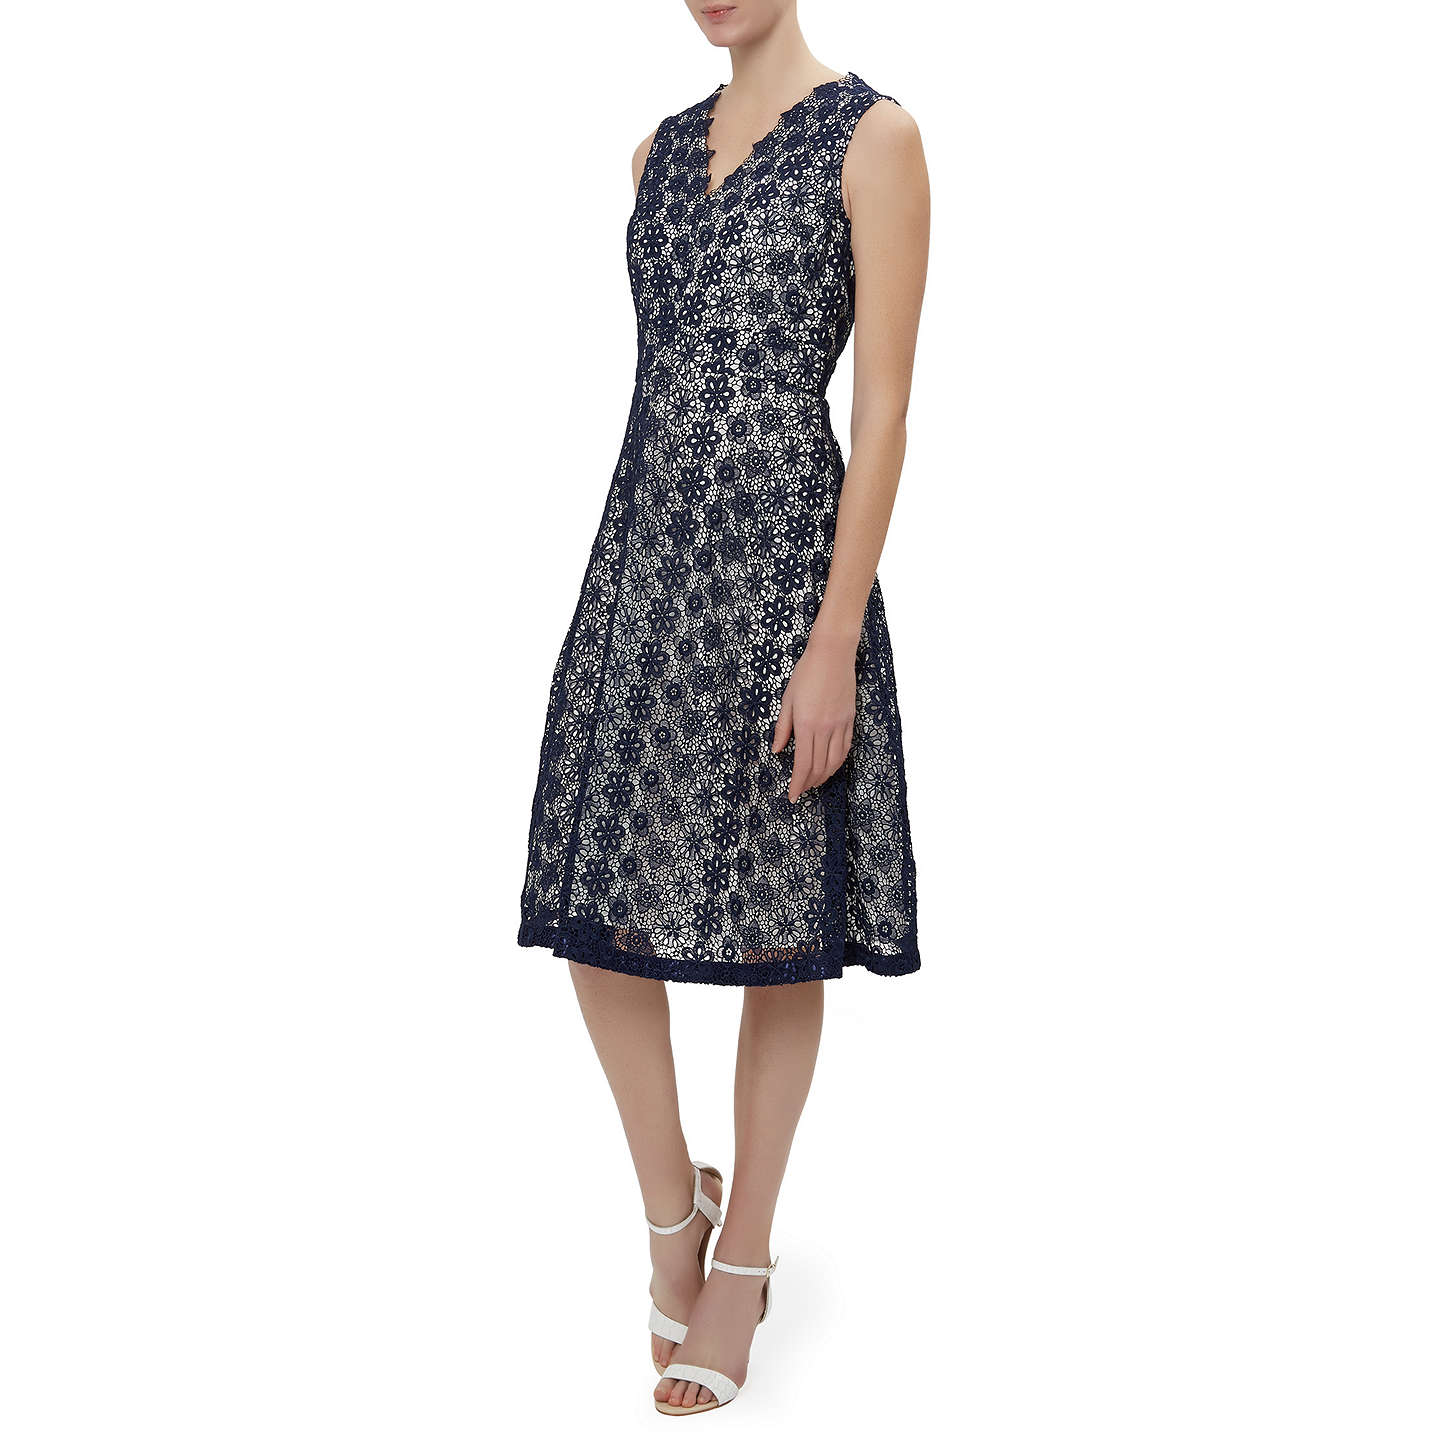 Damsel in a dress Lace Dress, Navy at John Lewis